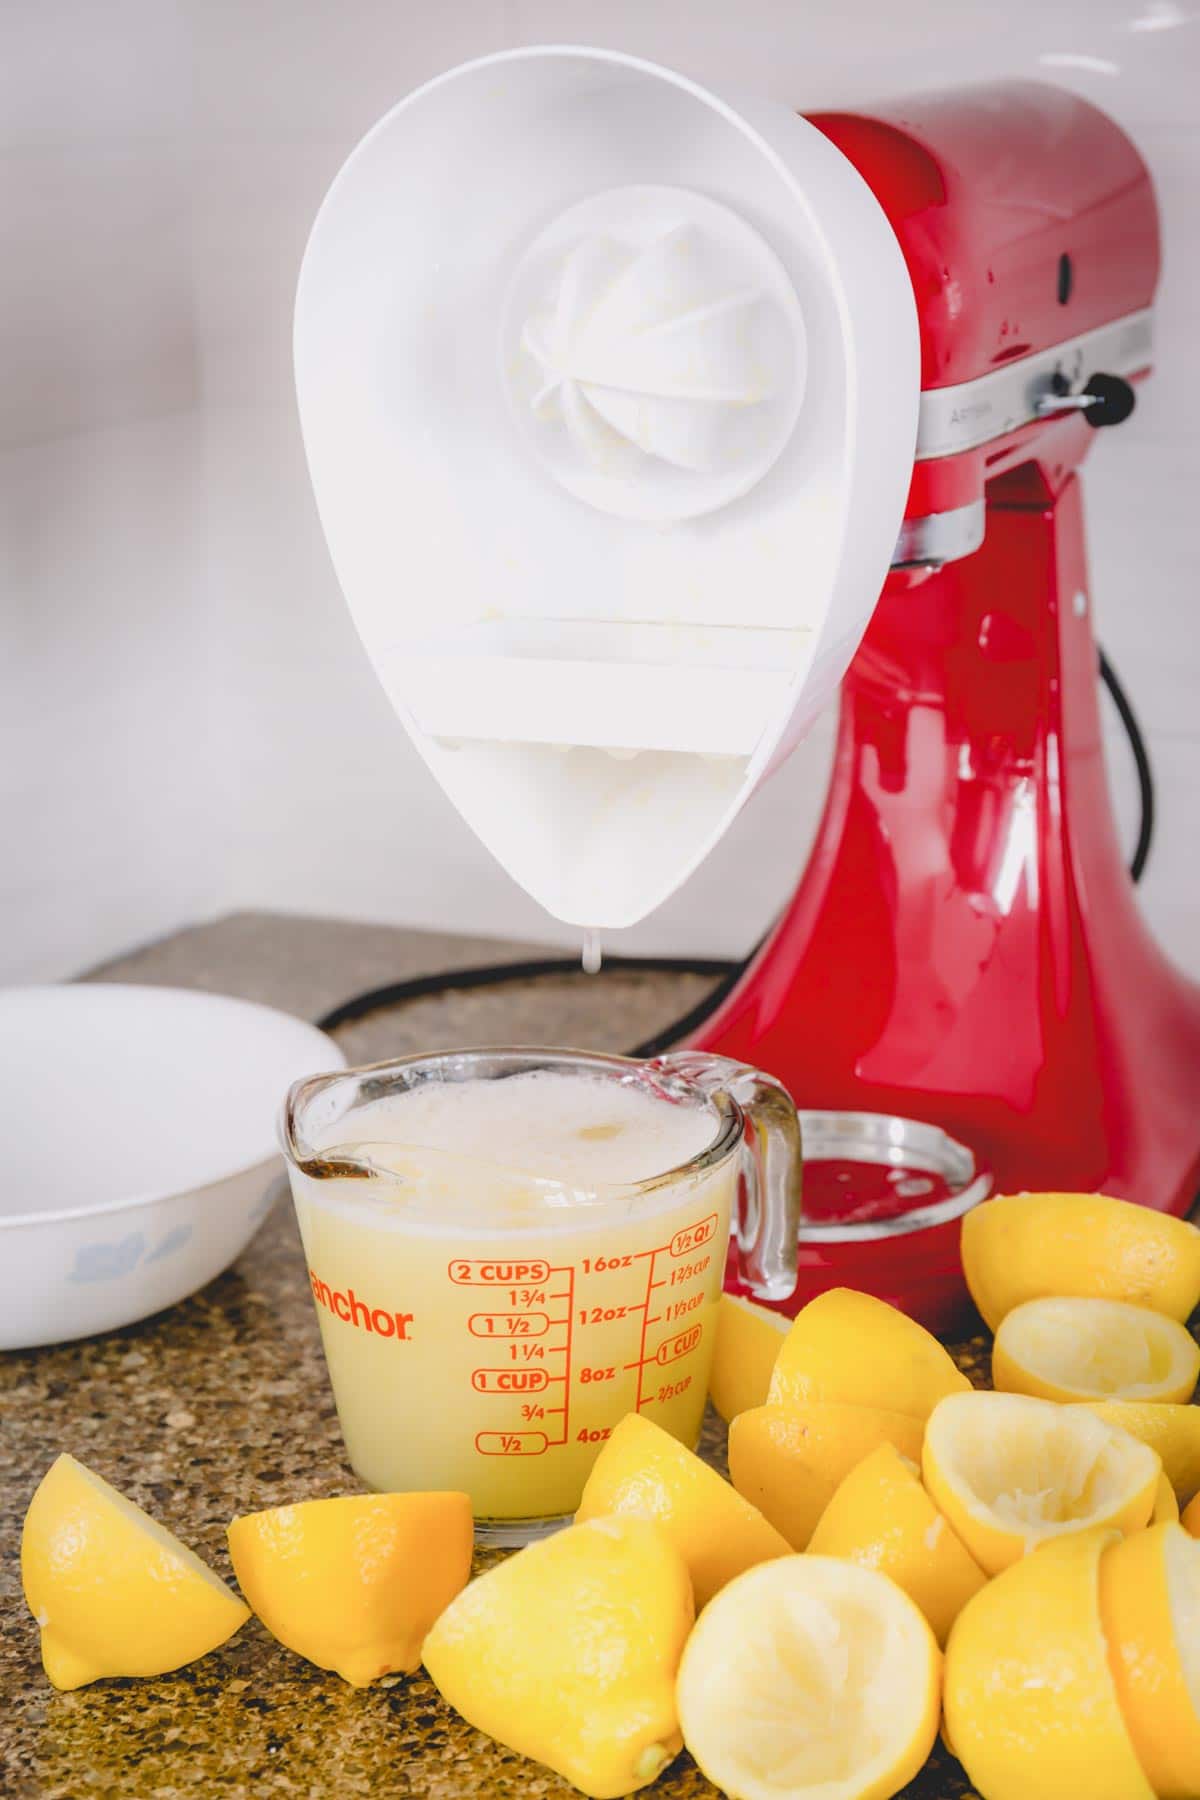 KitchenAid mixer with juicer attachment and freshly squeezed lemon juice.